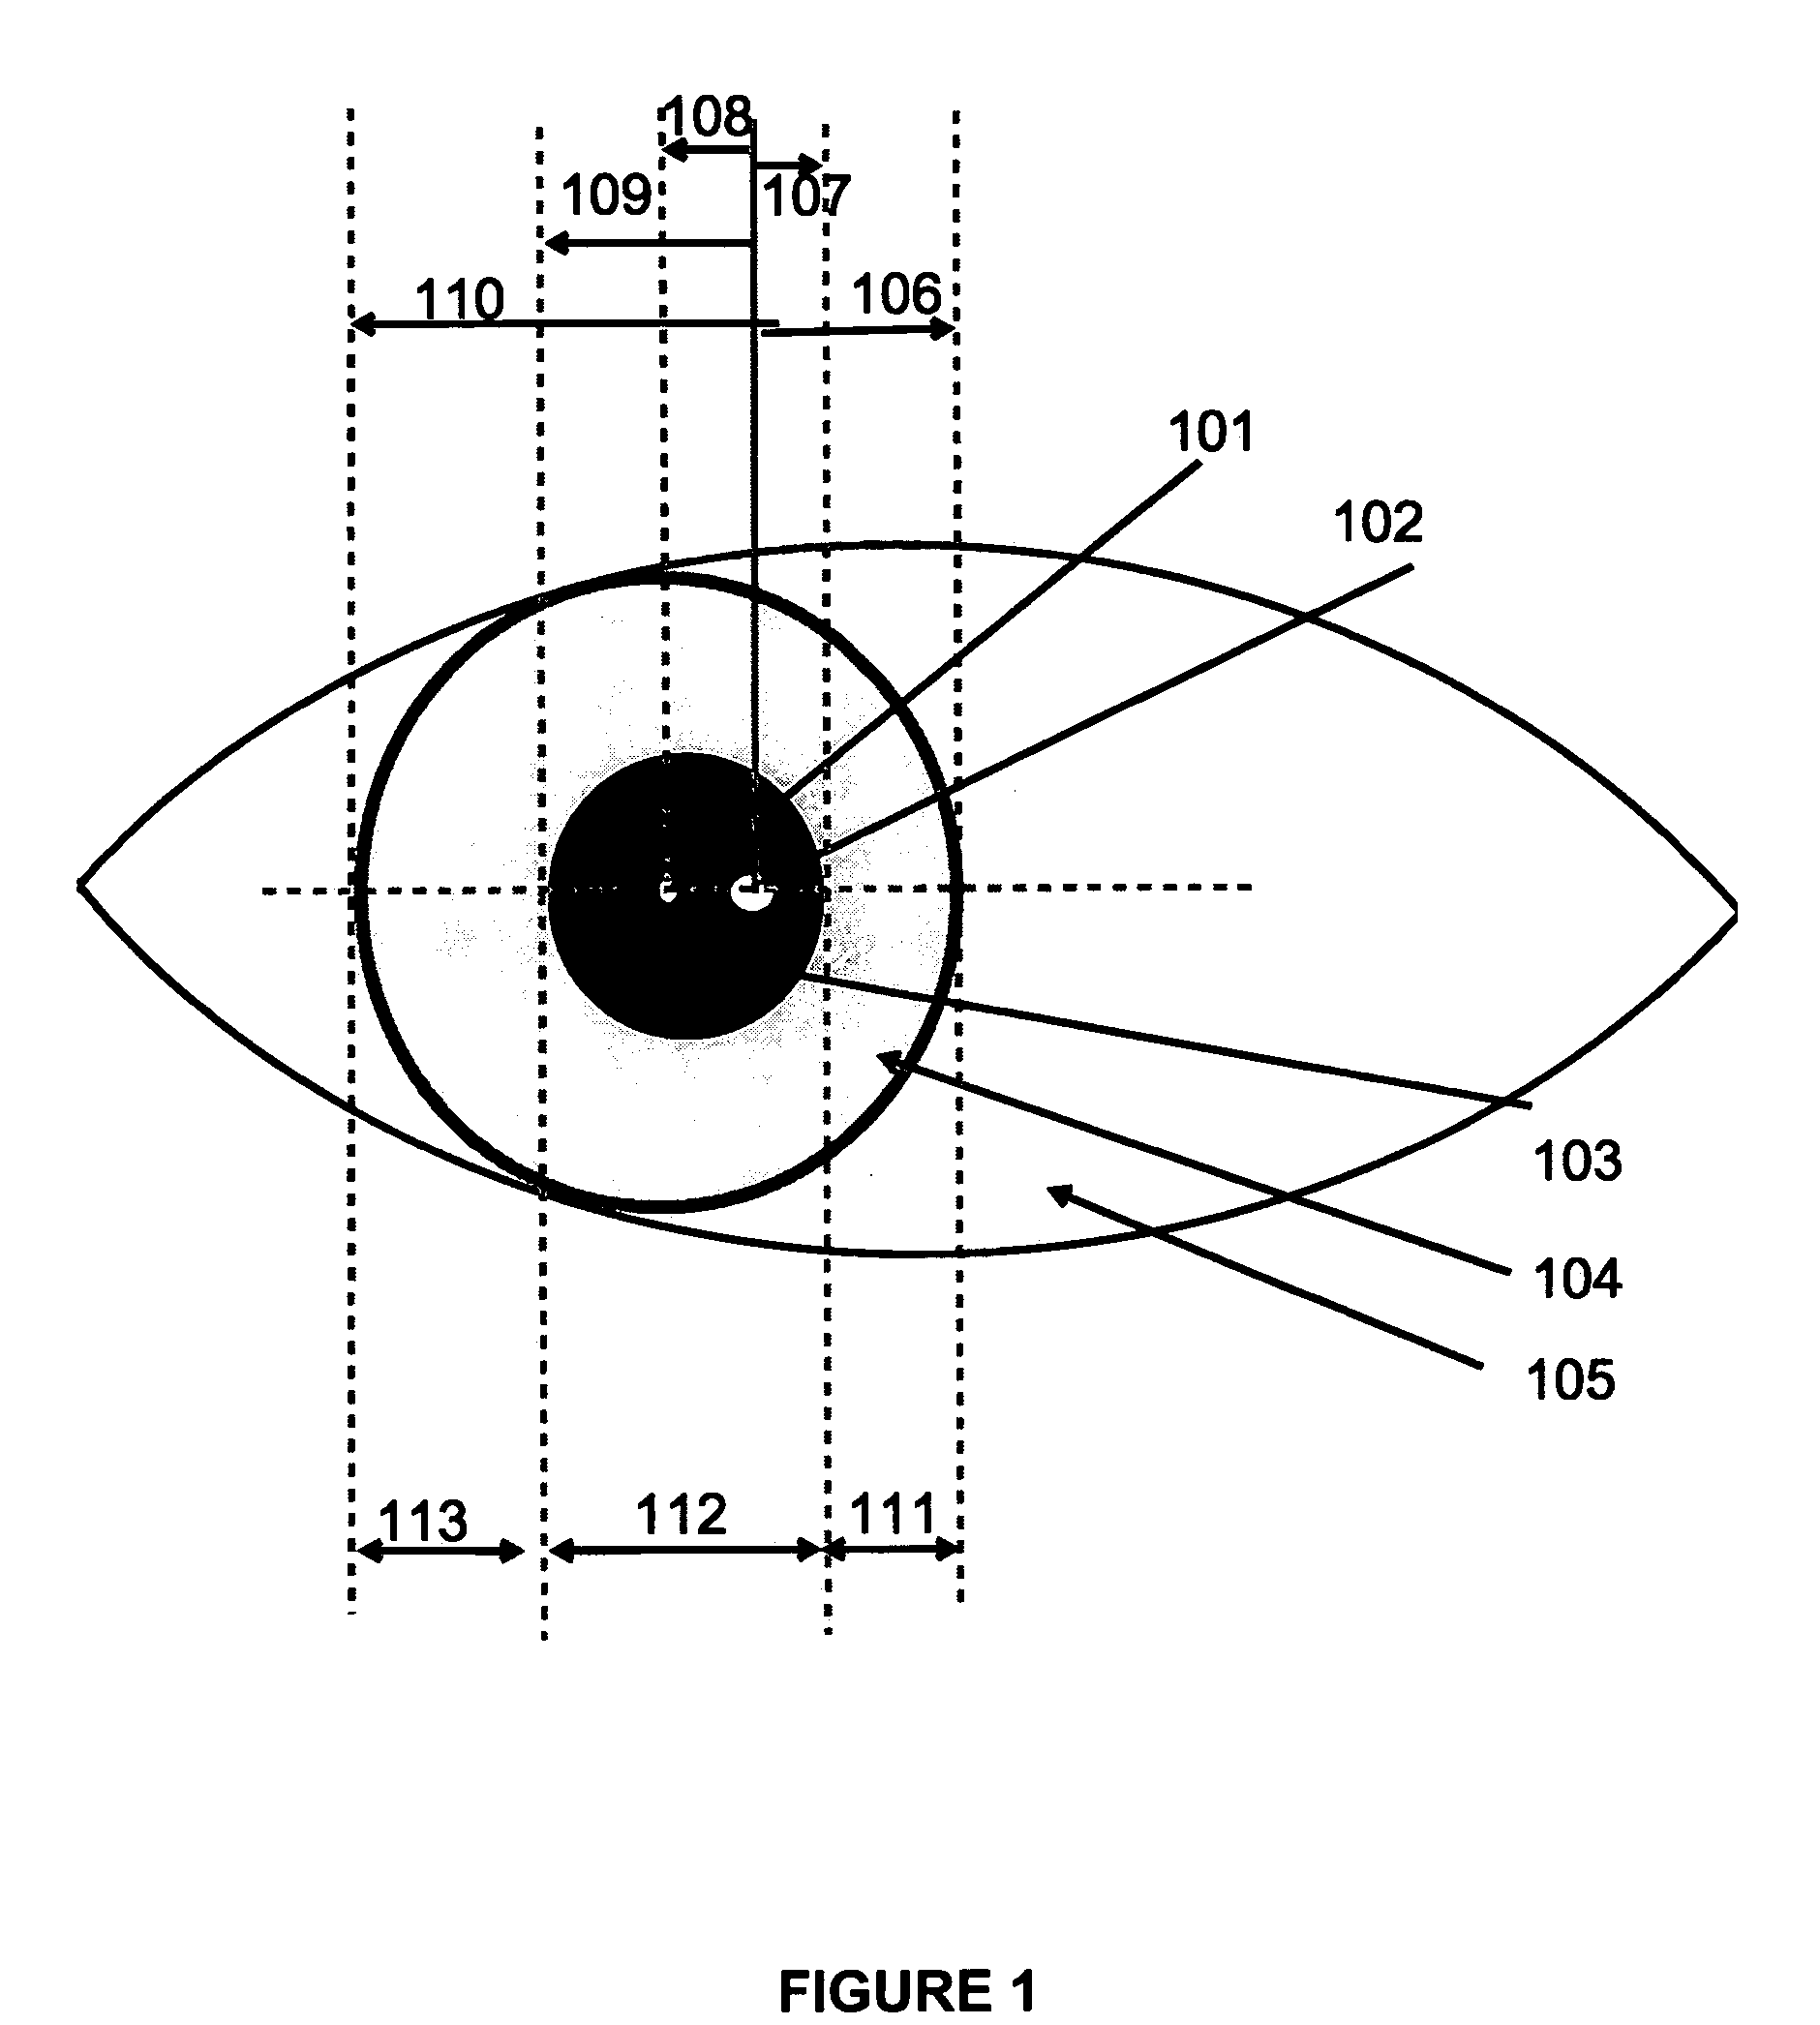 Method and apparatus for calibration-free eye tracking using multiple glints or surface reflections